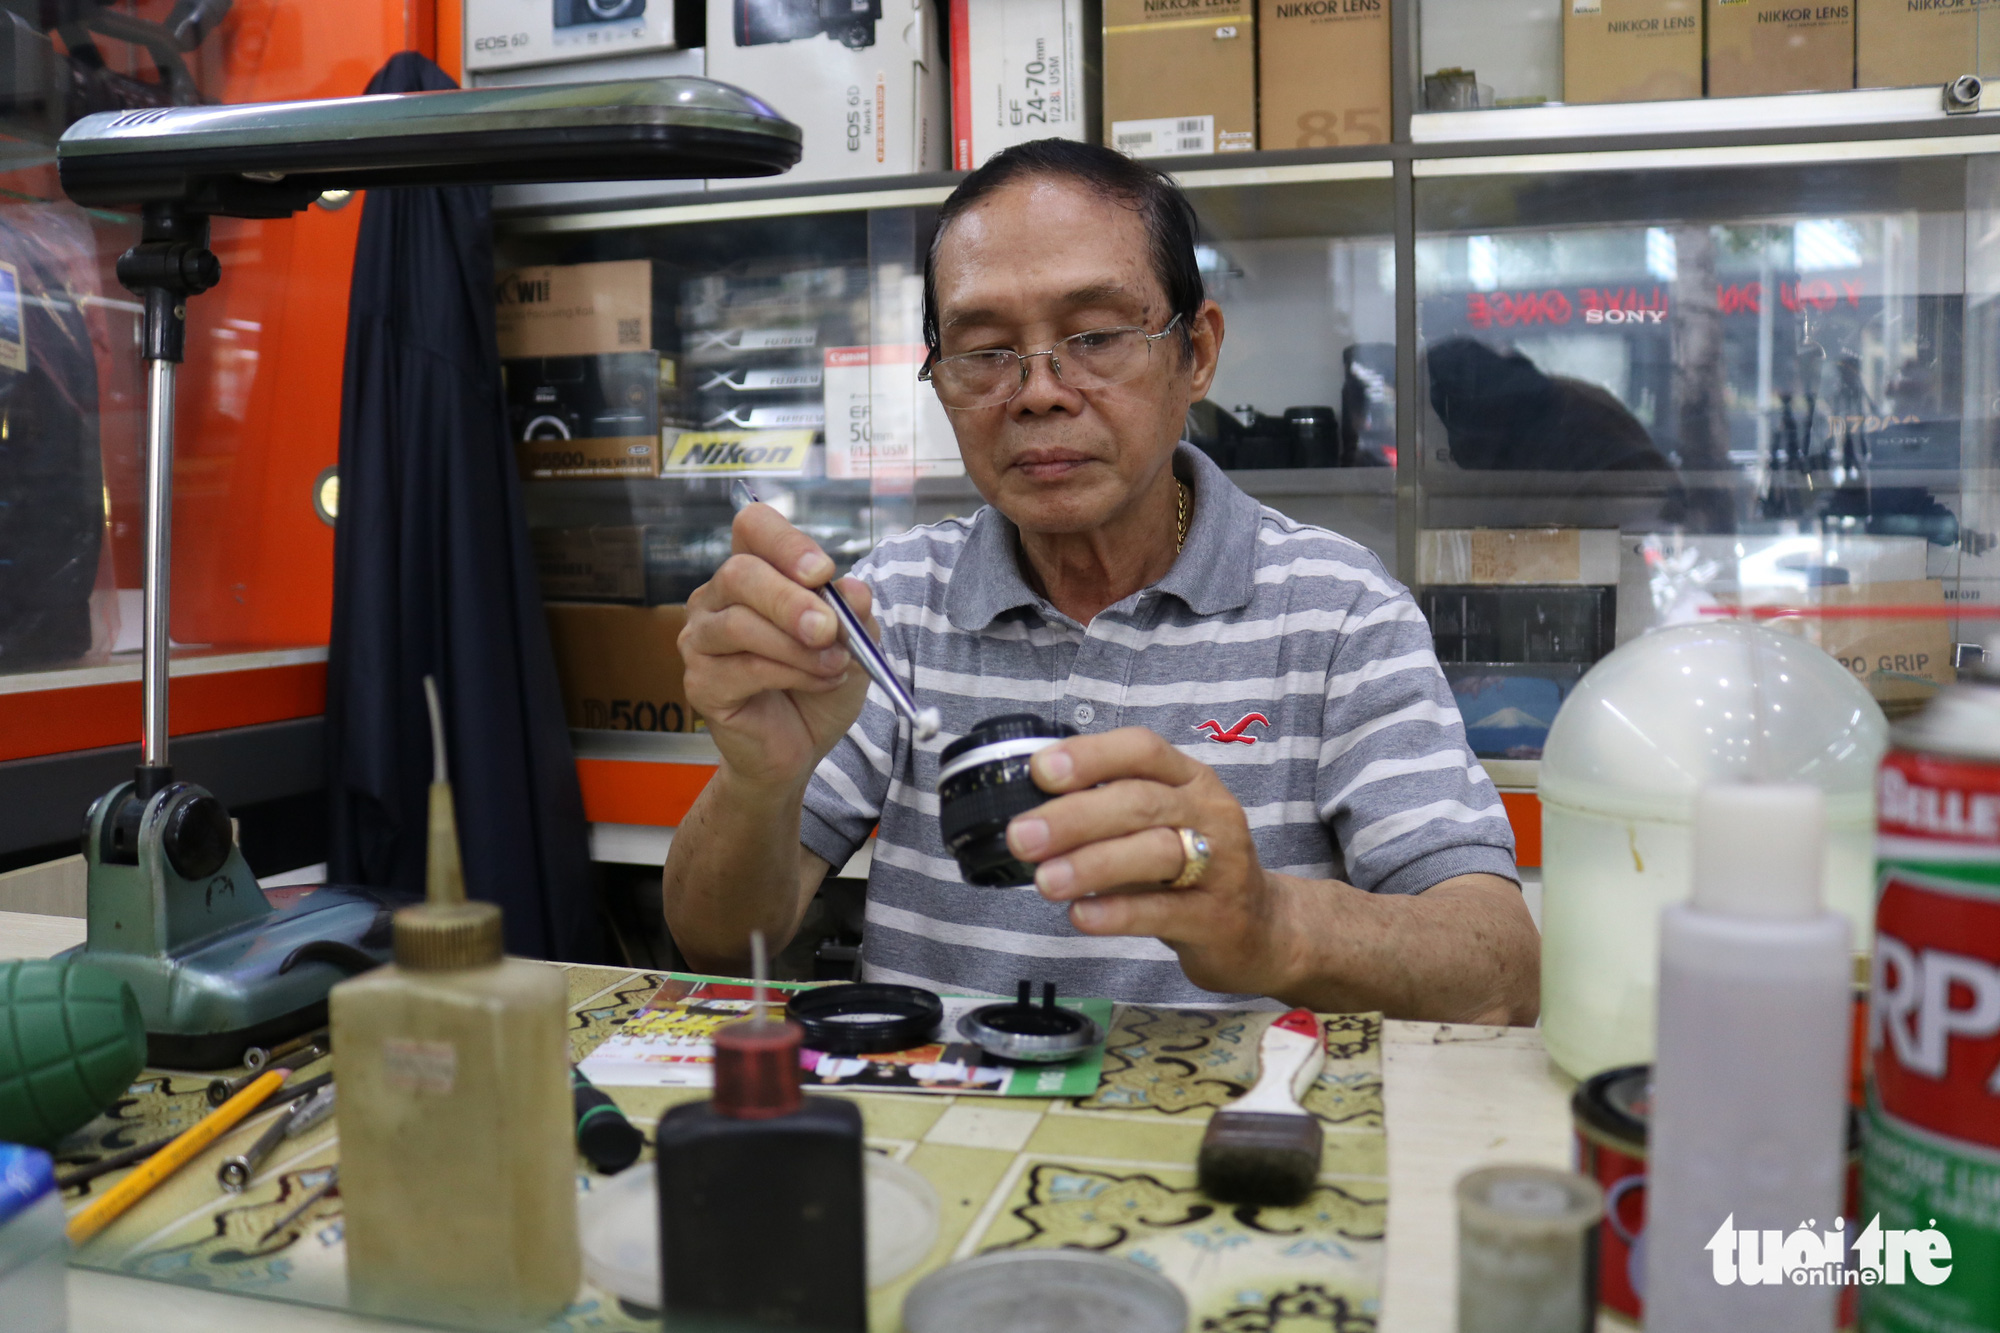 Every day, Nguyen Van Tan travels from his home in District 10 to a camera shop in District 1 to do his job. Photo: Ngoc Phuong/ Tuoi Tre